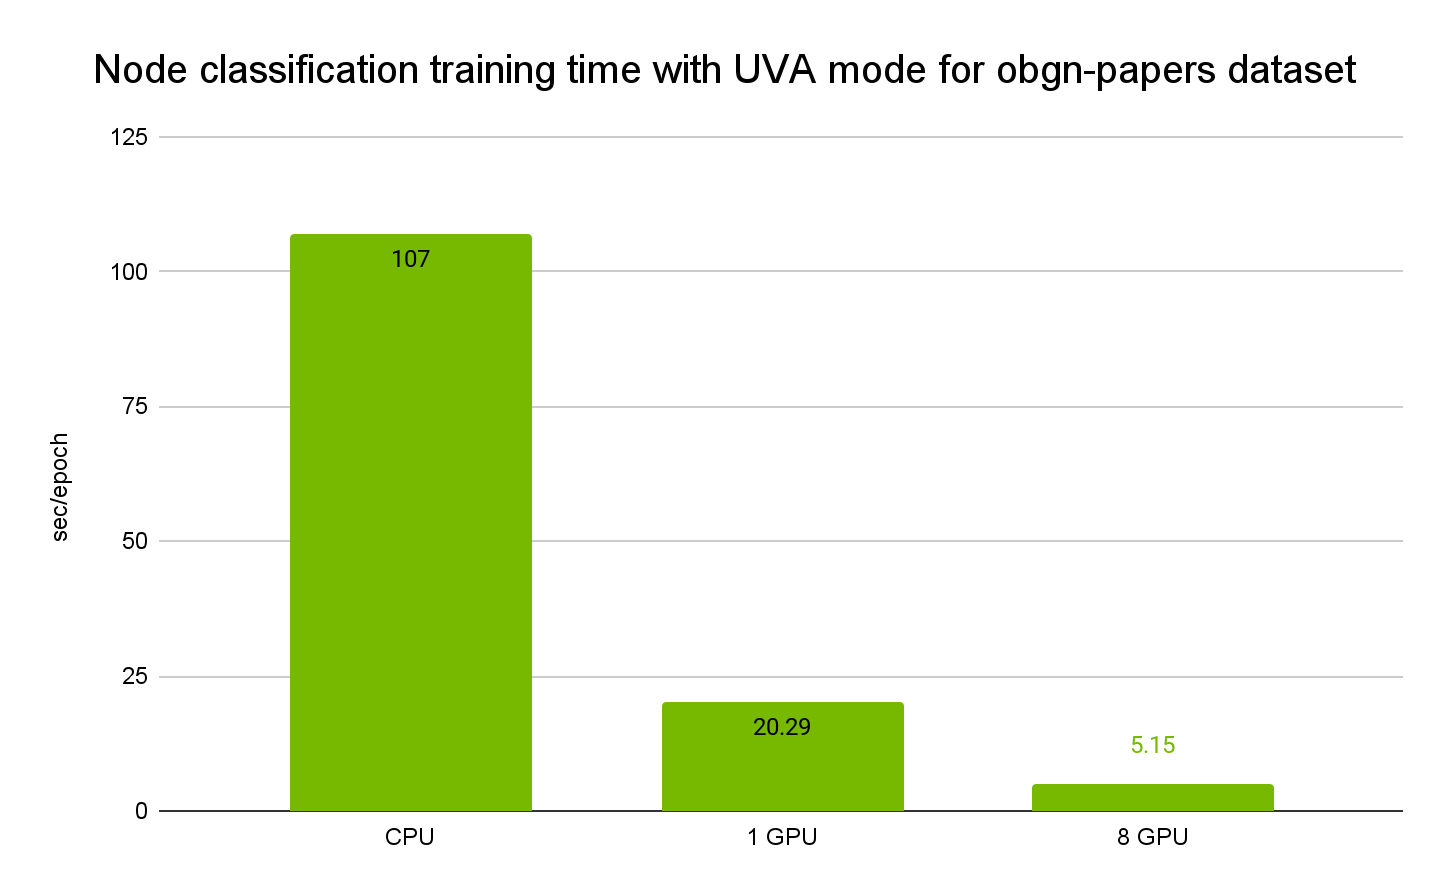 A bar graph compares the training times in sec/epoch for obgn-papers dataset with UVA mode on CPU (107 seconds), one GPU (20.29 seconds), and eight GPUs (5.15 seconds).